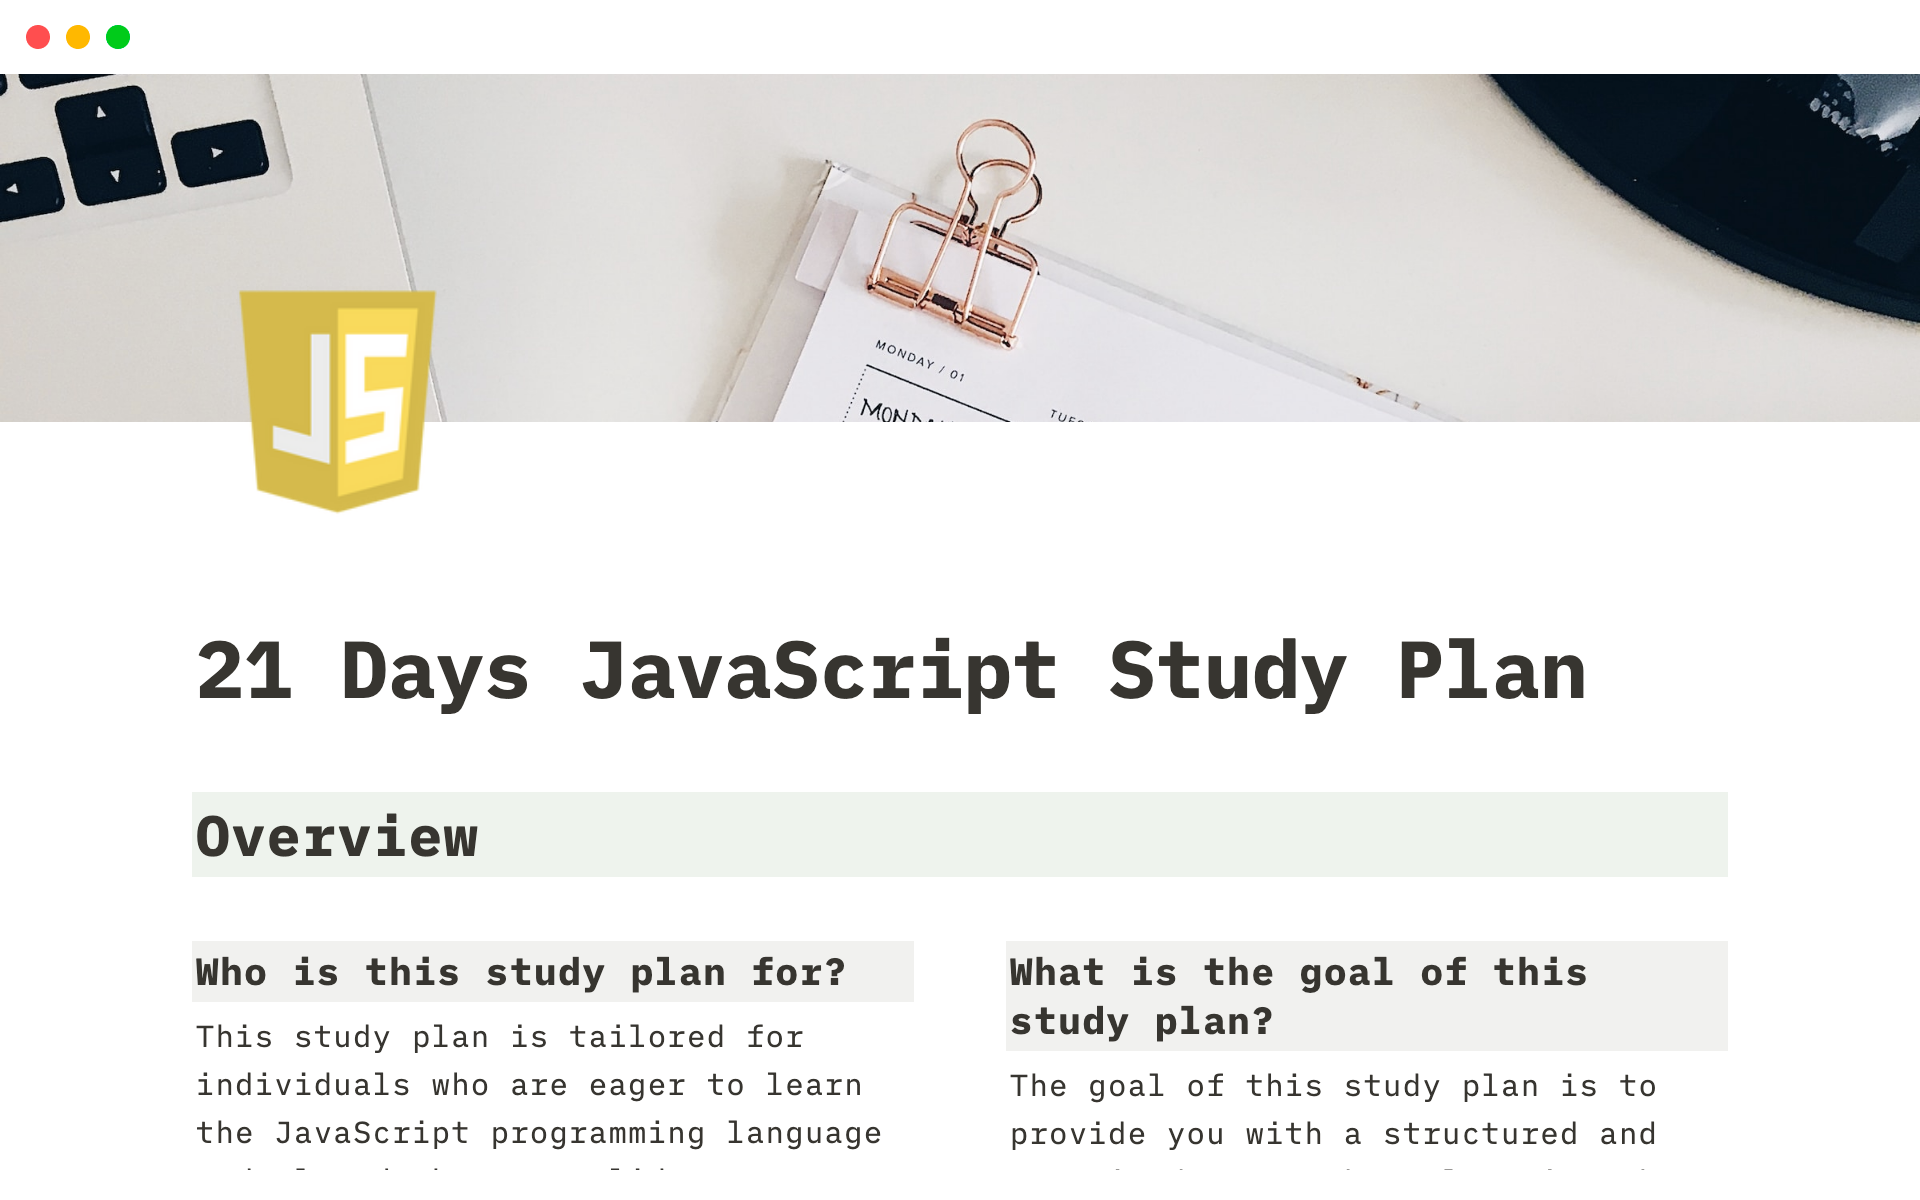 It is designed to help you stay focused and on track as you embark on your journey to master the JavaScript programming language.